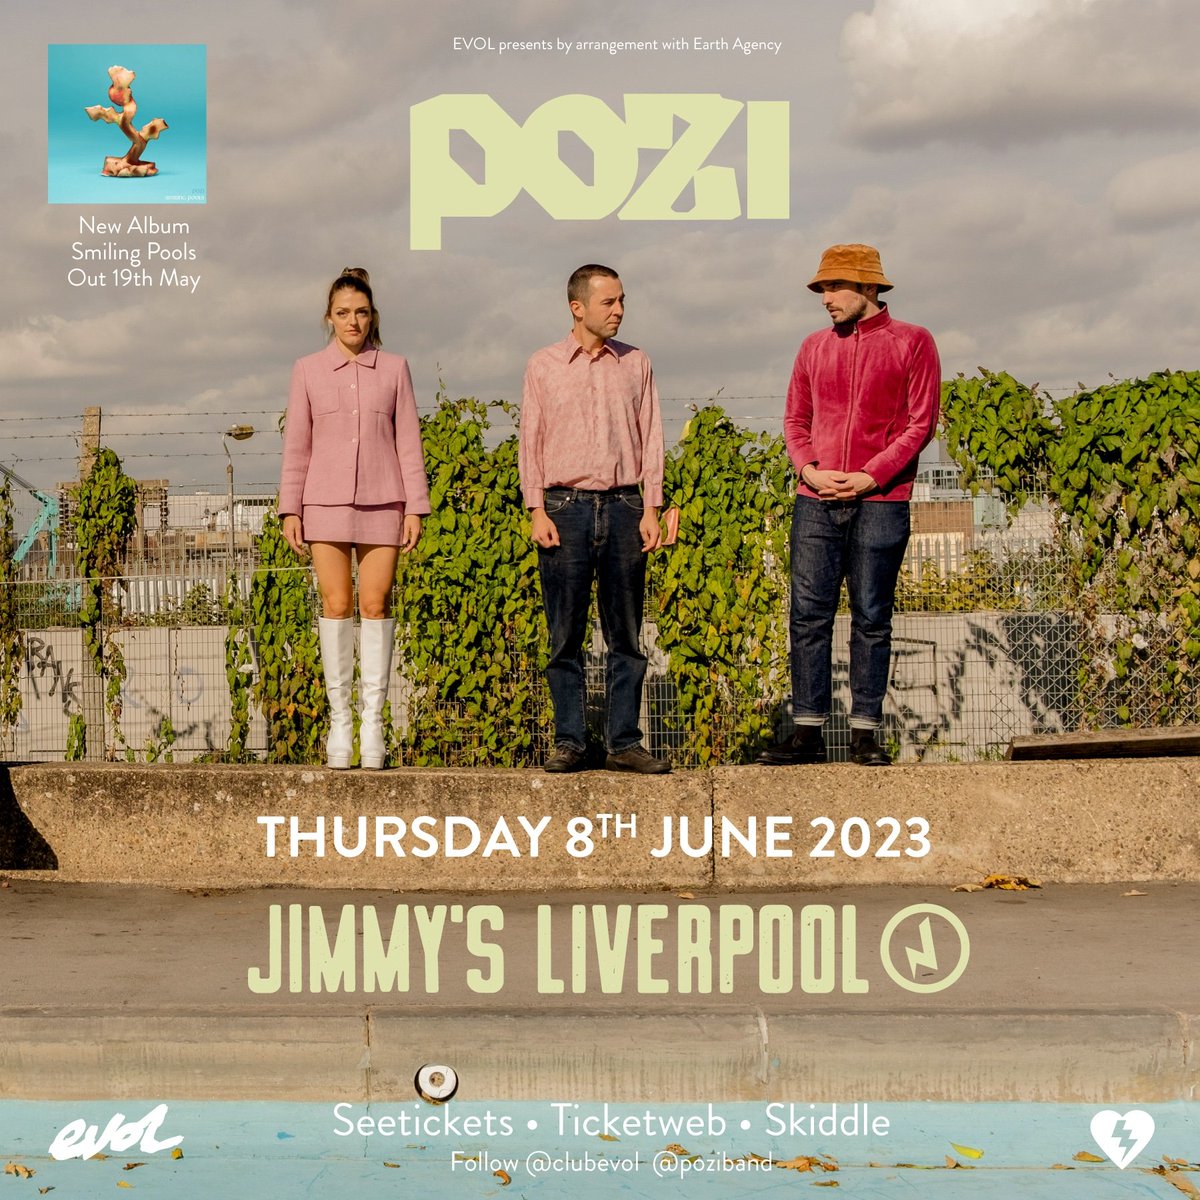 New @poziband single 'Pest Control' available to stream now here: open.spotify.com/album/3sFxdA58… it's taken from their sophomore album Smiling Pools which is out May 19 on @PRAHRecordings. They bring the album LIVE to @JimmysLiverpool June 8. Get tickets here: seetickets.com/event/pozi/jim…